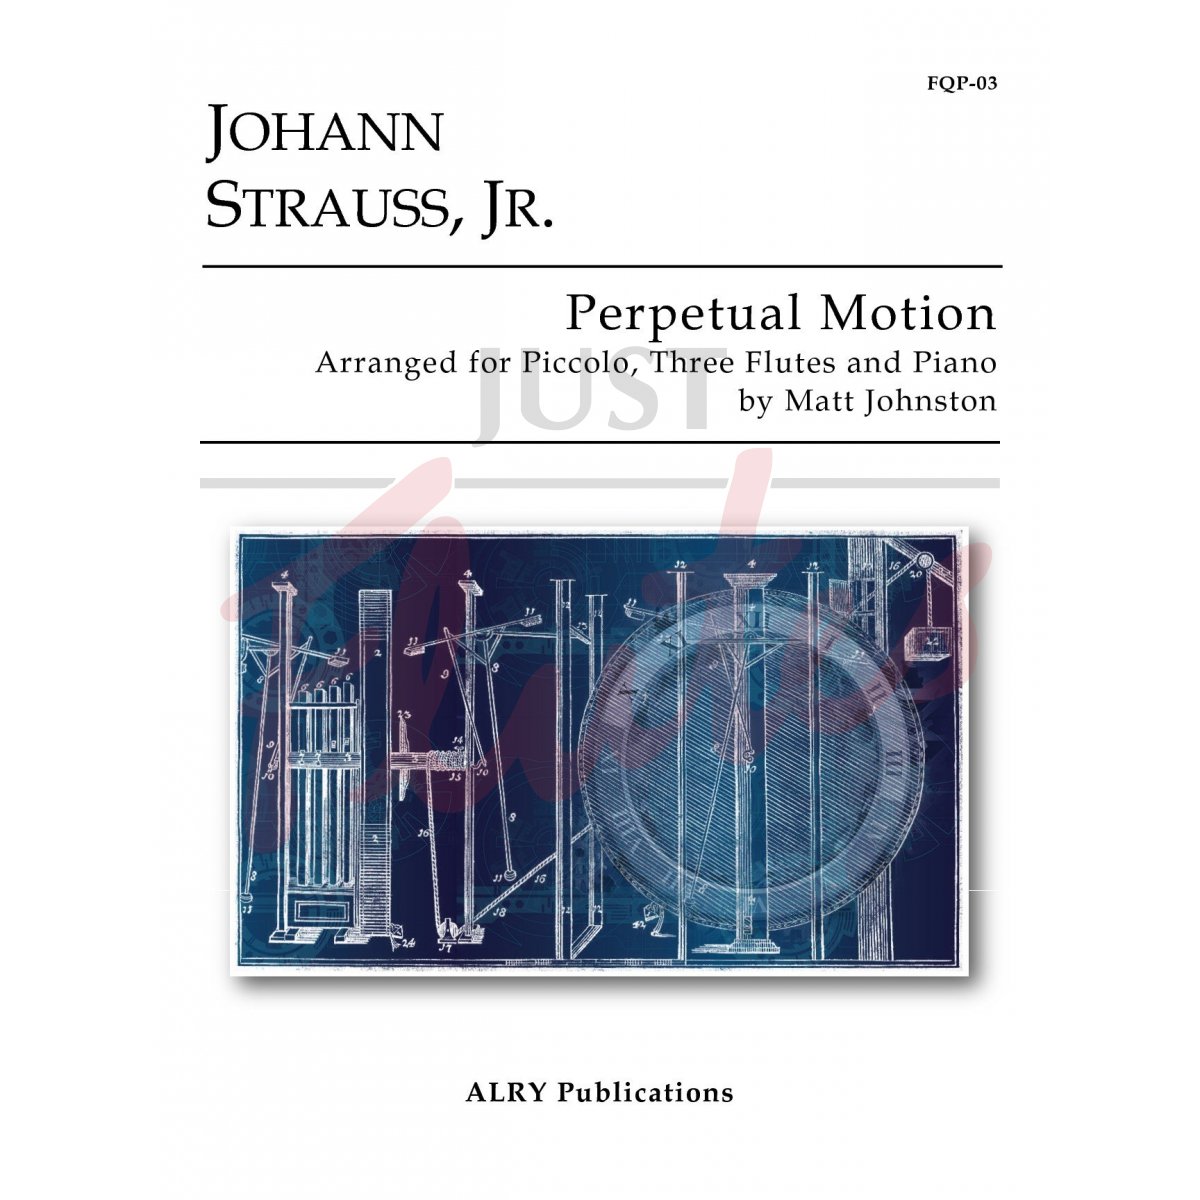 Perpetual Motion for Four Flutes and Piano